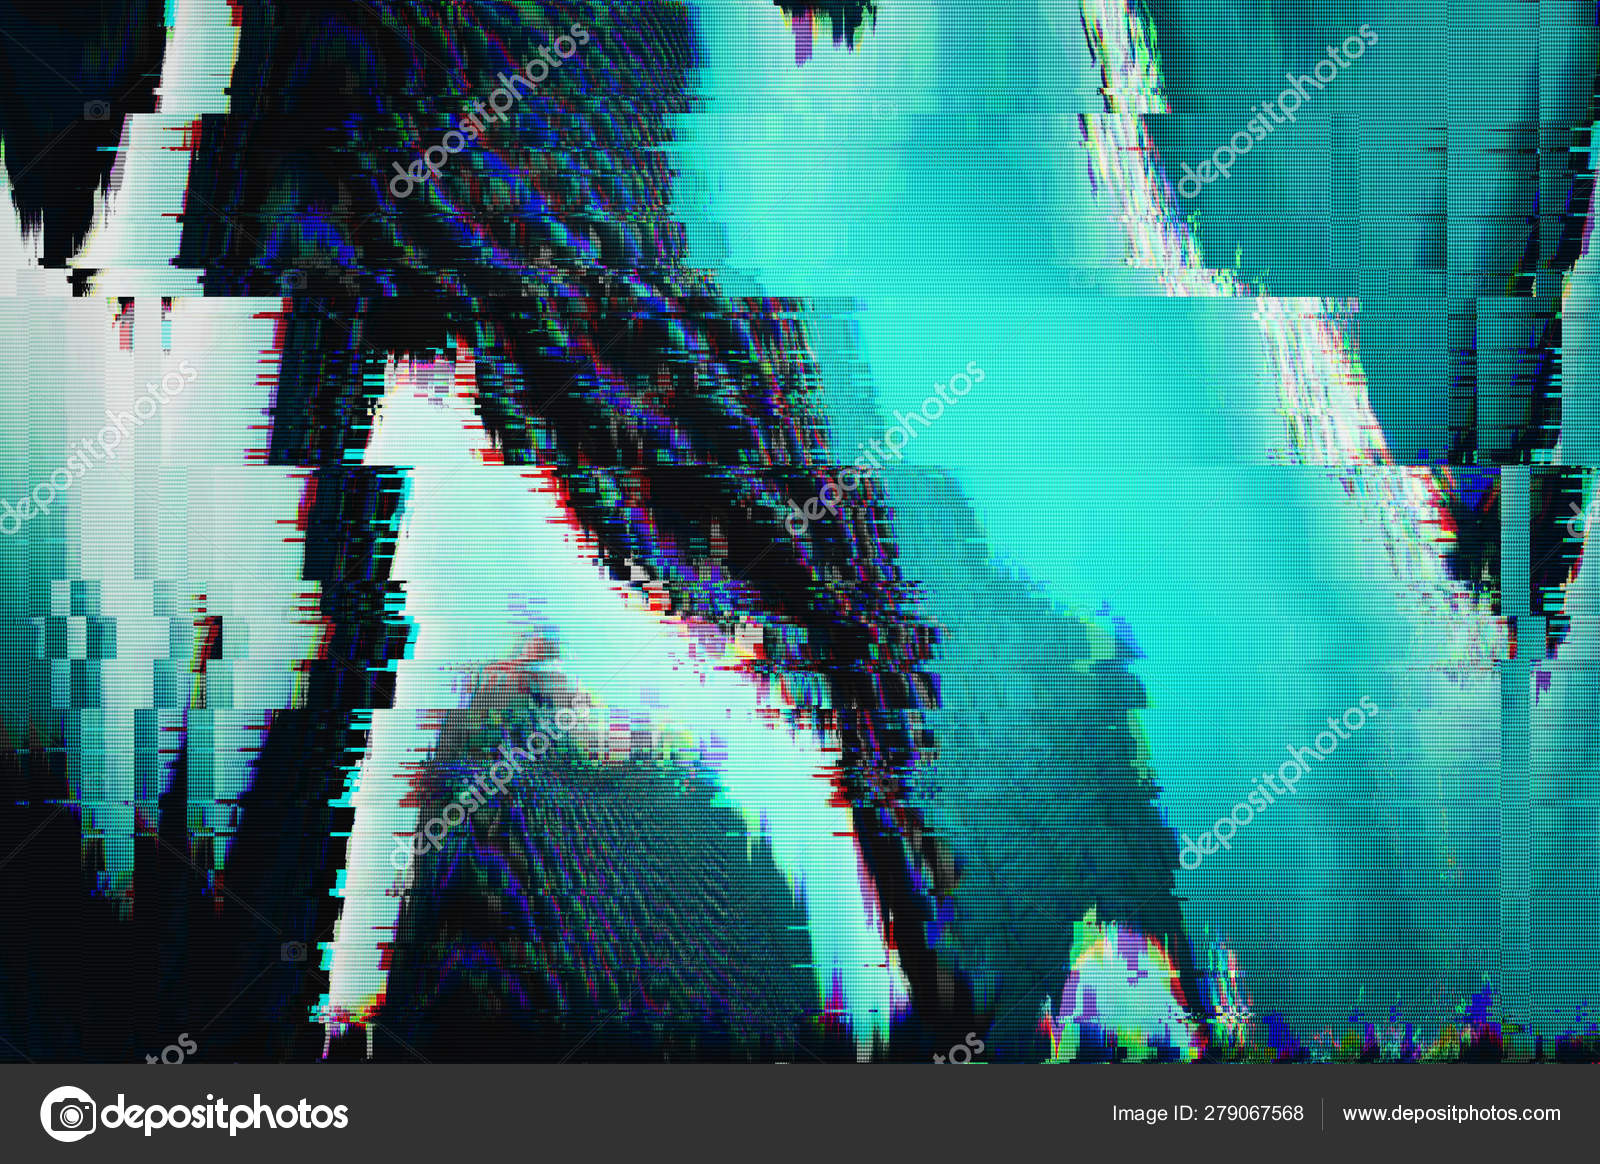 Glitch Effect Background Images, HD Pictures and Wallpaper For